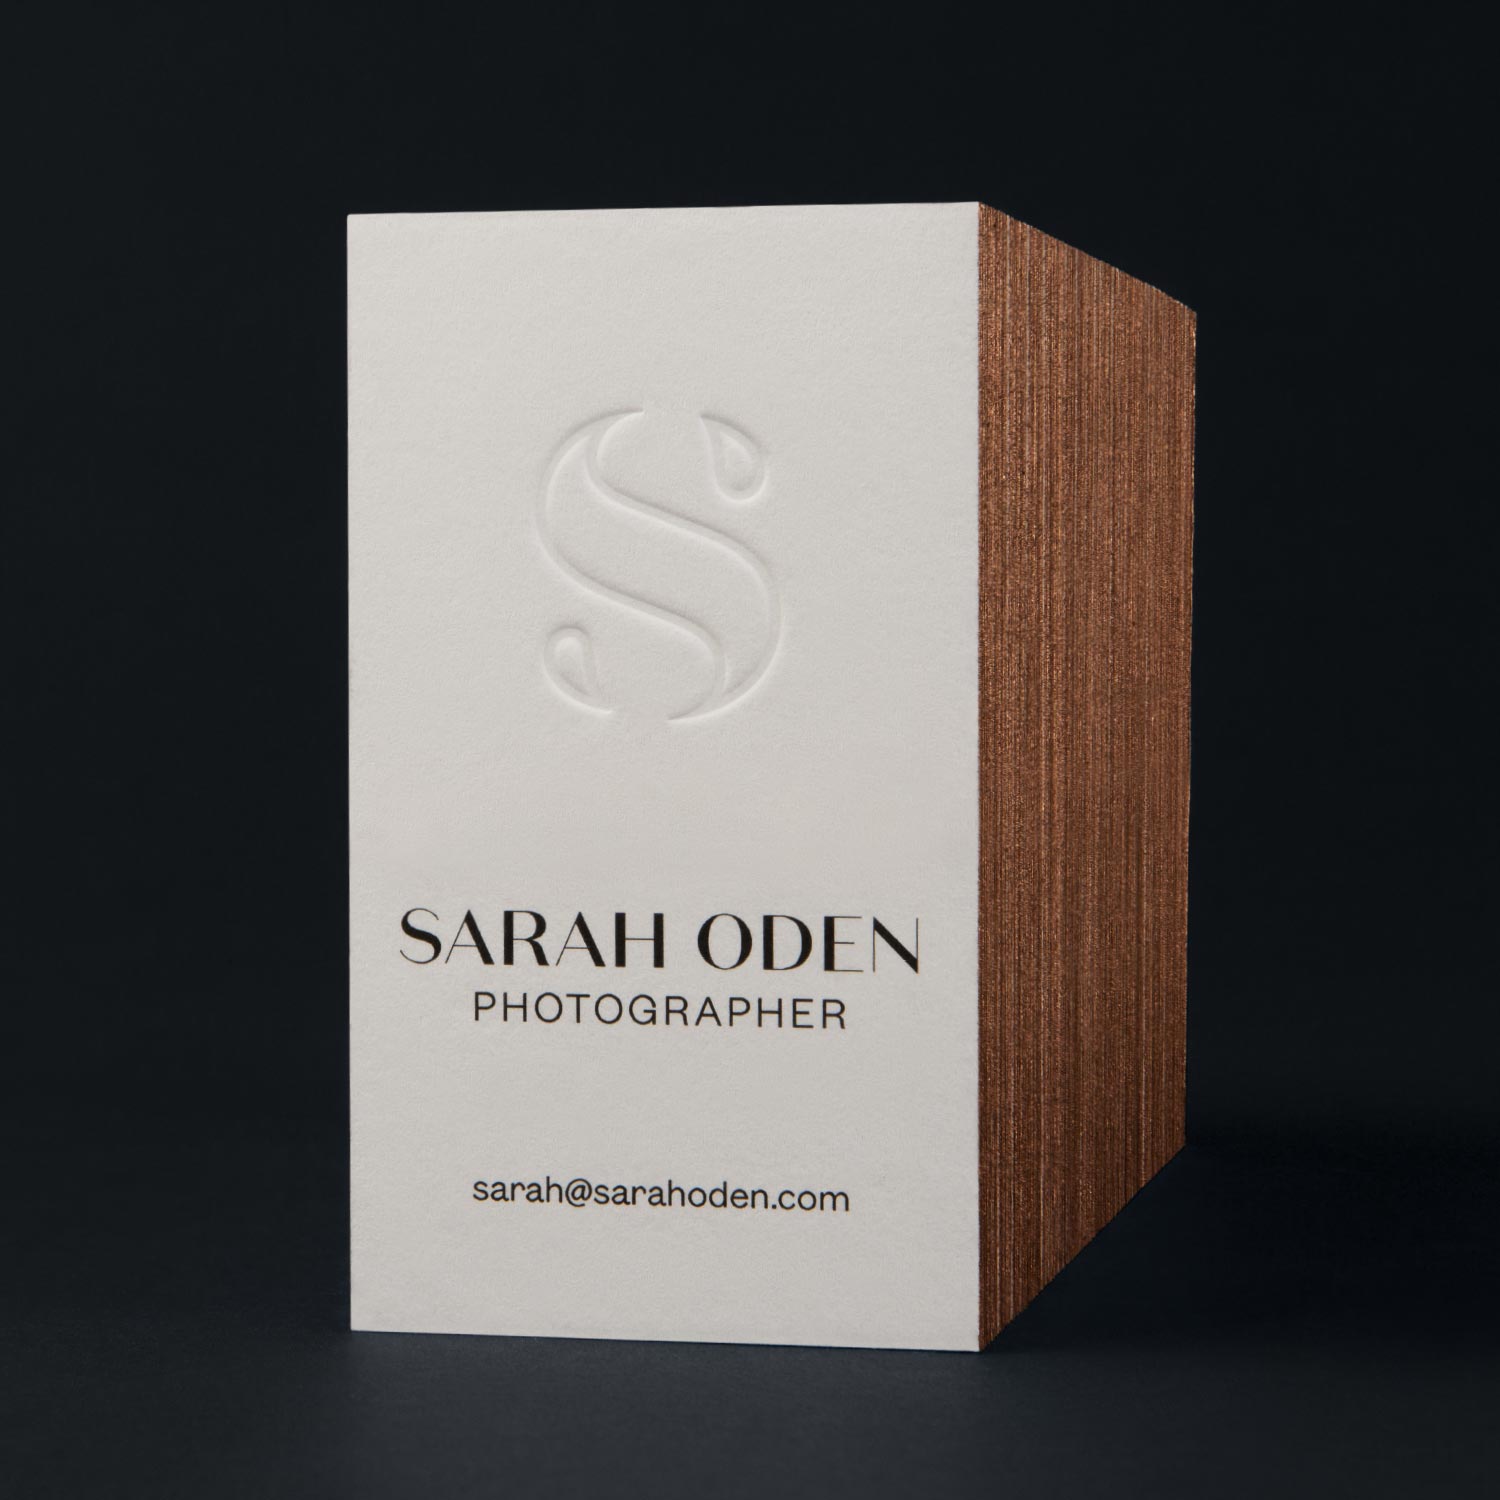 Sarah Oden Photographer luxury business cards with embossed logo and painted edges—by Hunter Oden of oden.house